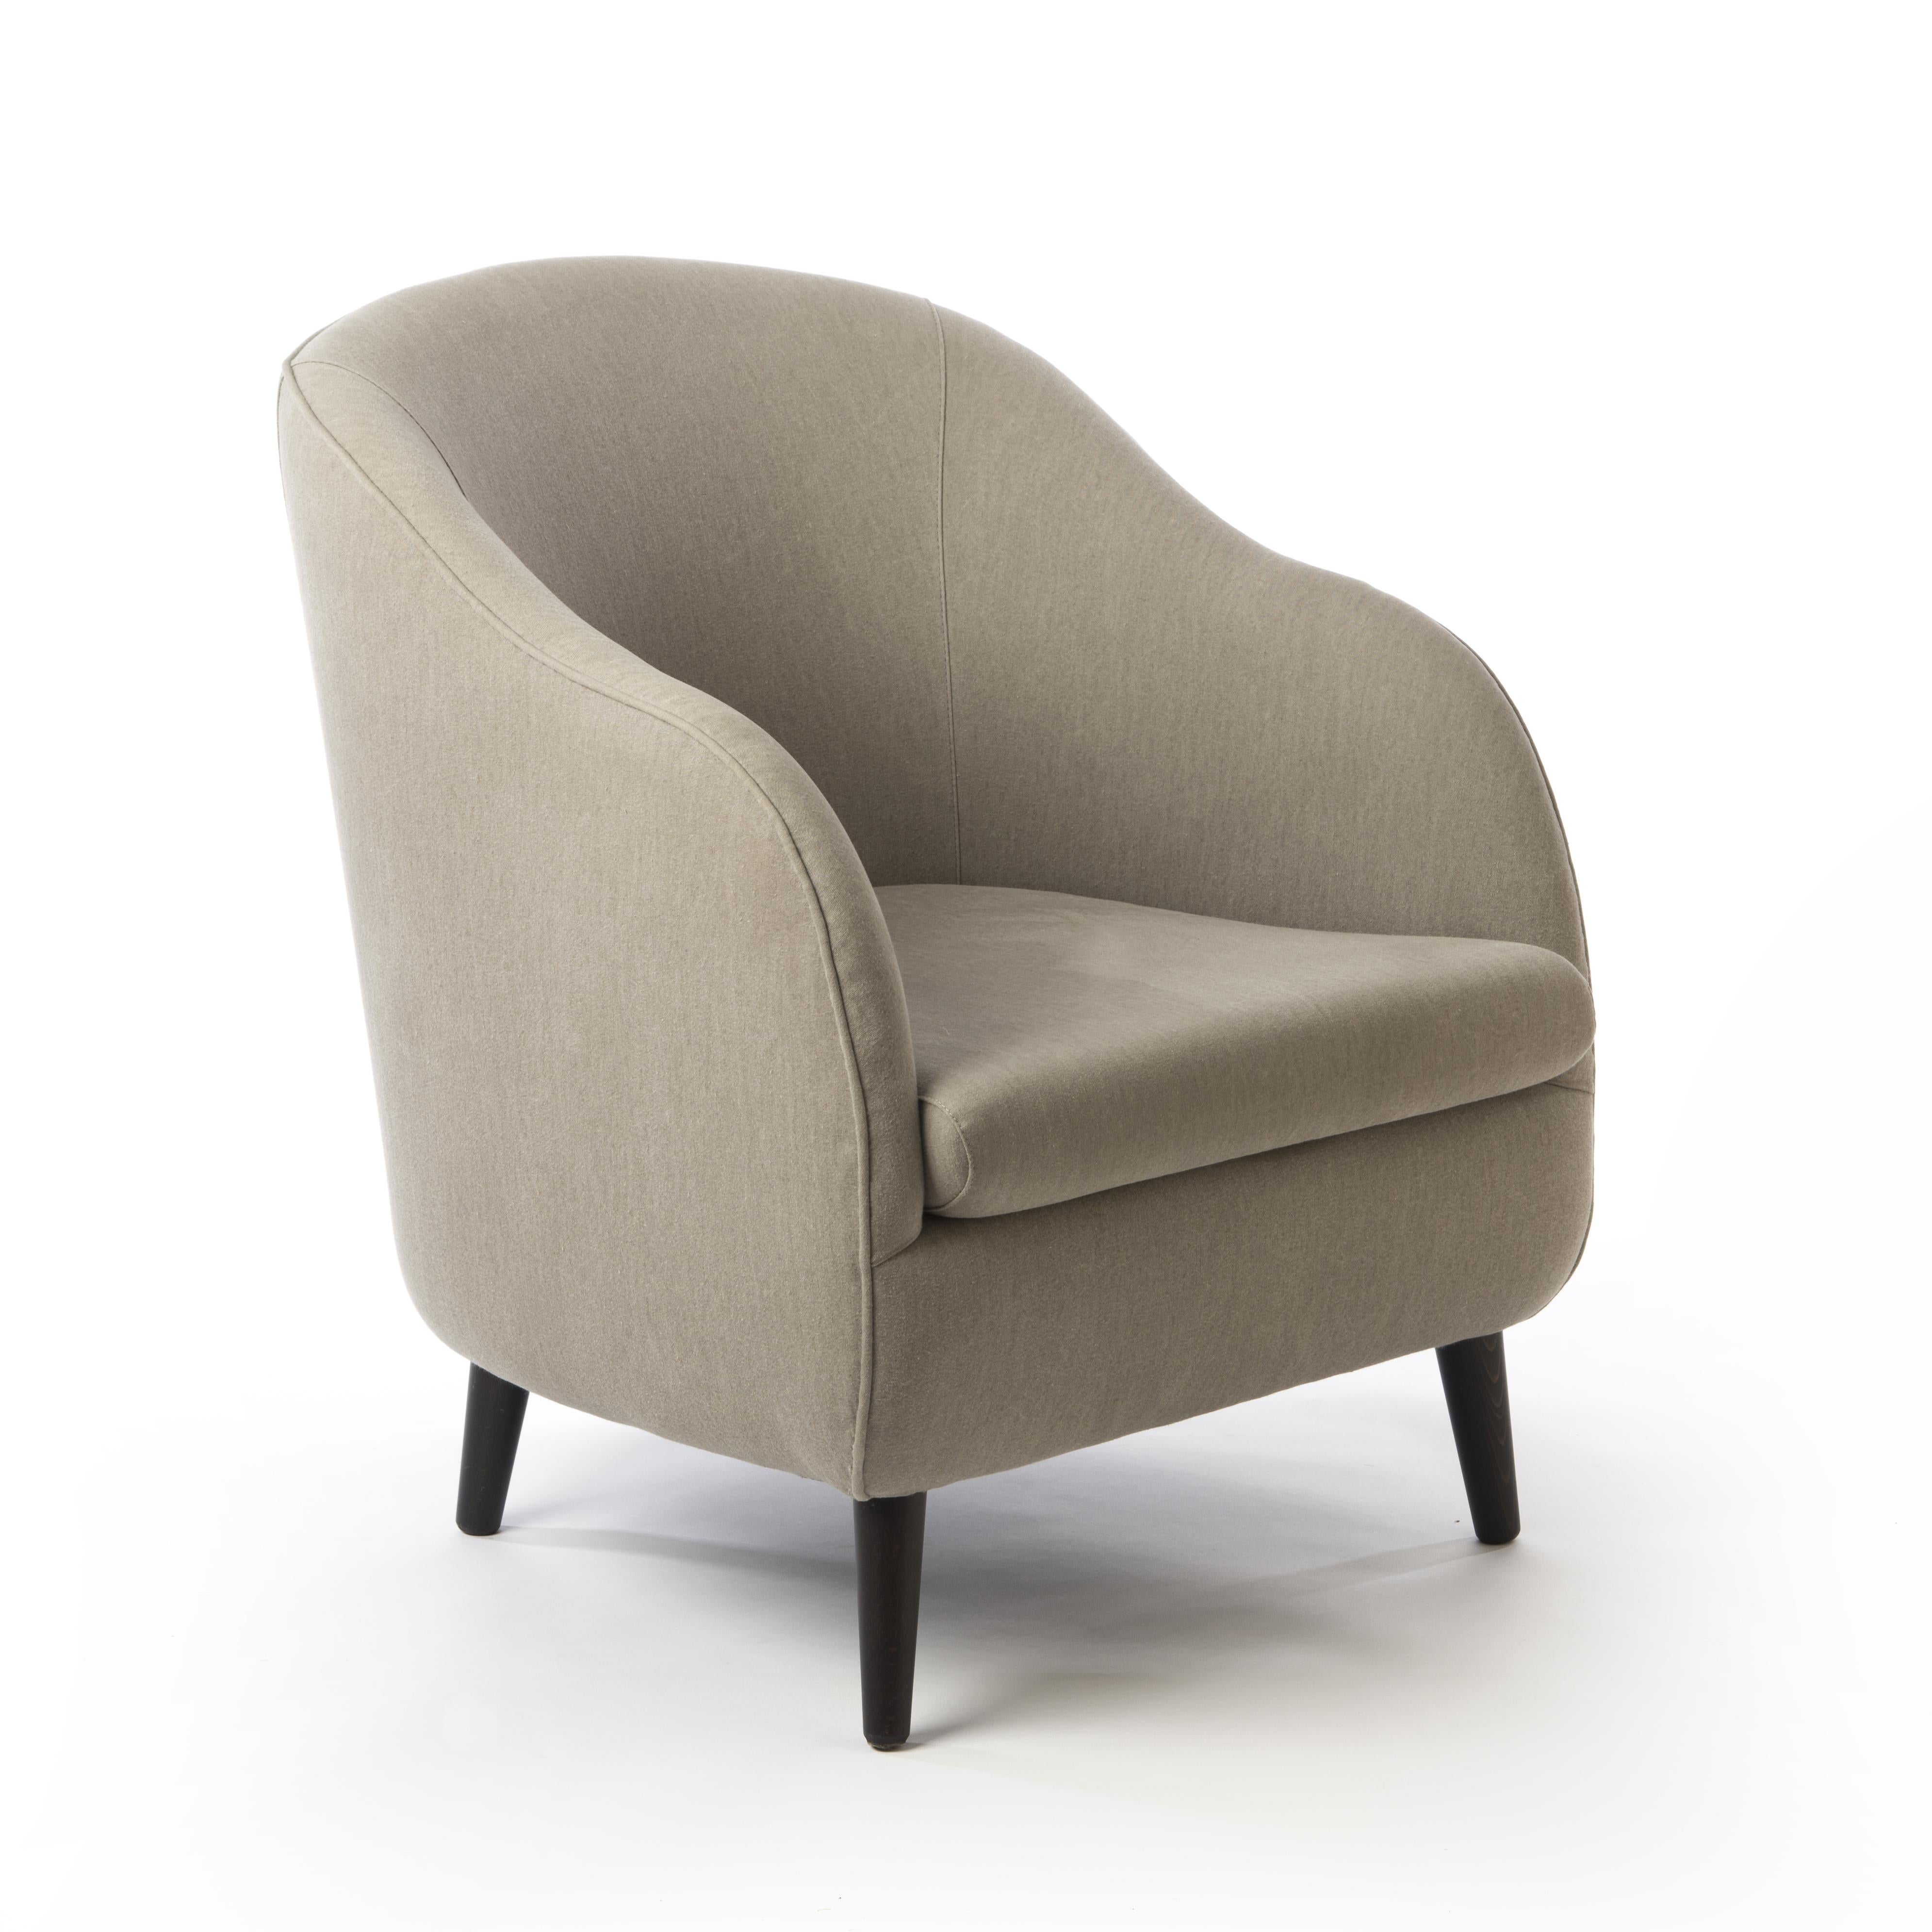 Scandinavian Modern Upholstered Armchair with Wooden Legs and Beige Cotton Fabric For Sale